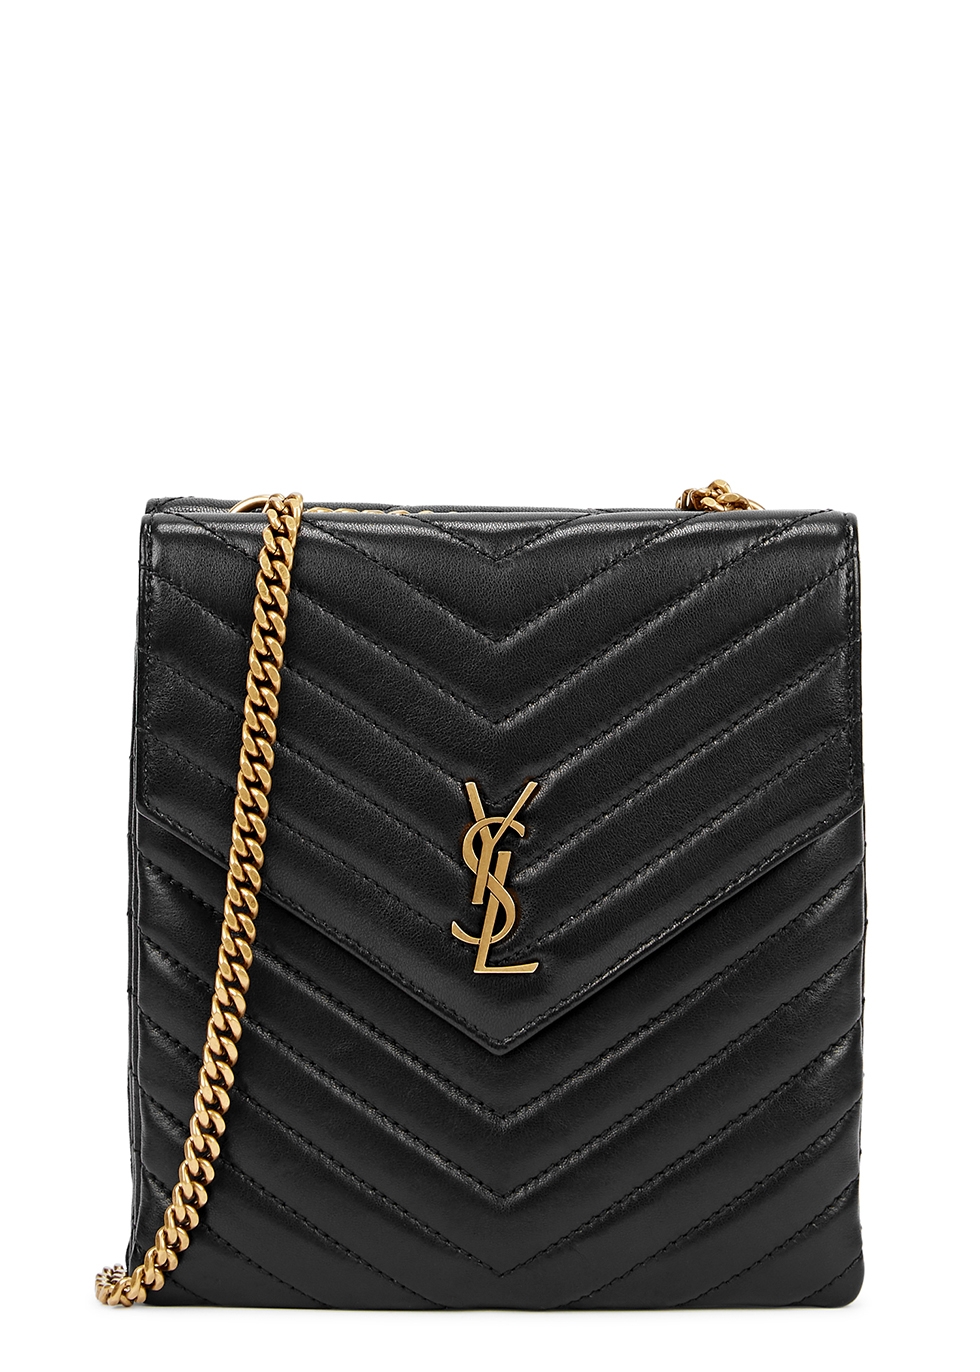 Double Flap black quilted leather cross-body bag